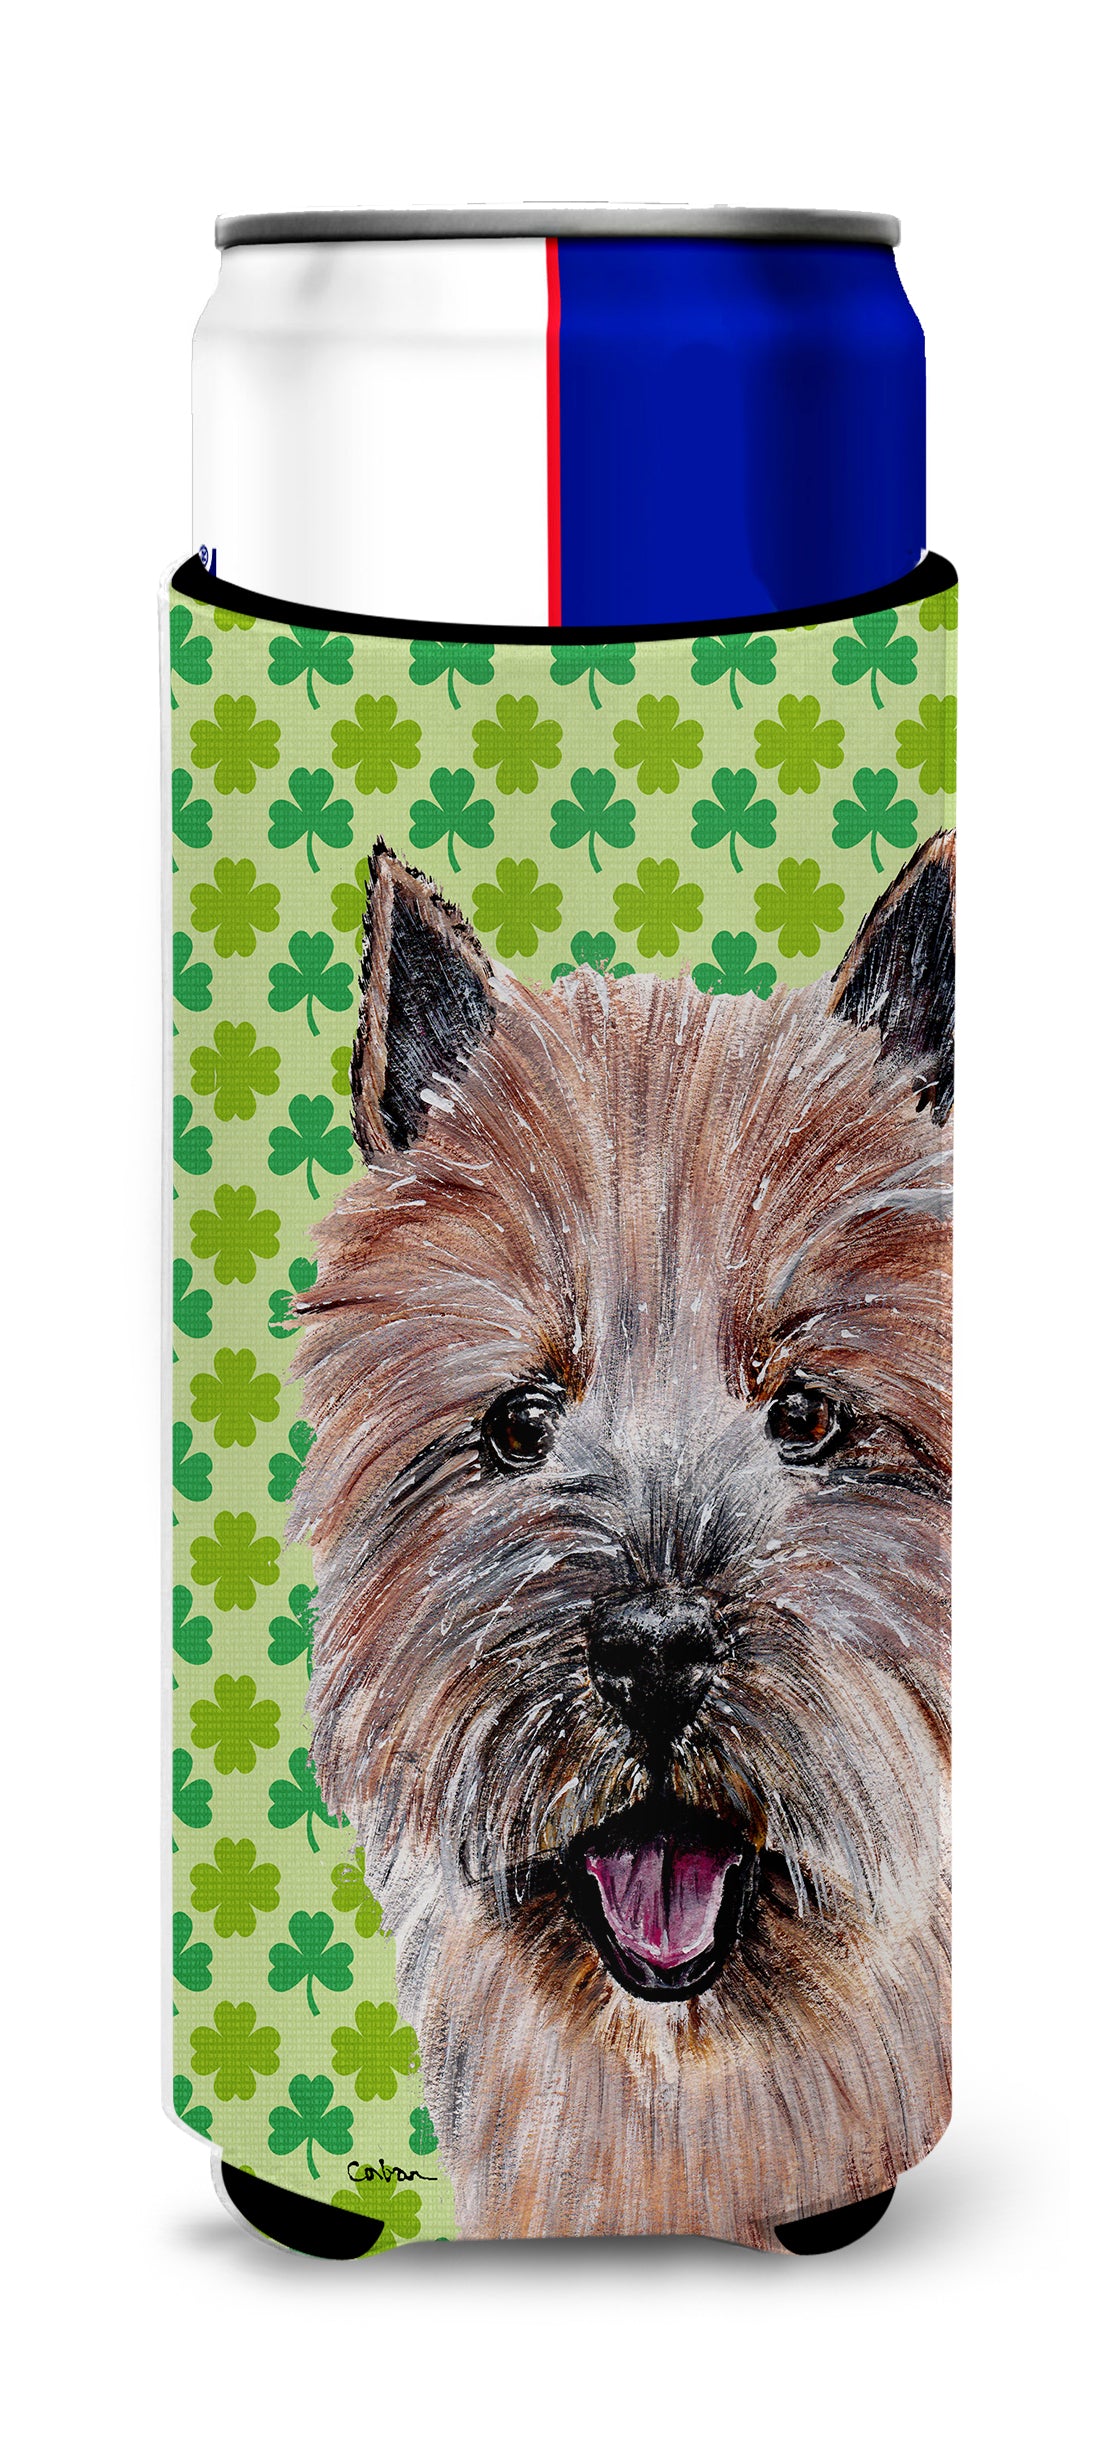 Norwich Terrier Lucky Shamrock St. Patrick's Day Ultra Beverage Insulators for slim cans SC9734MUK